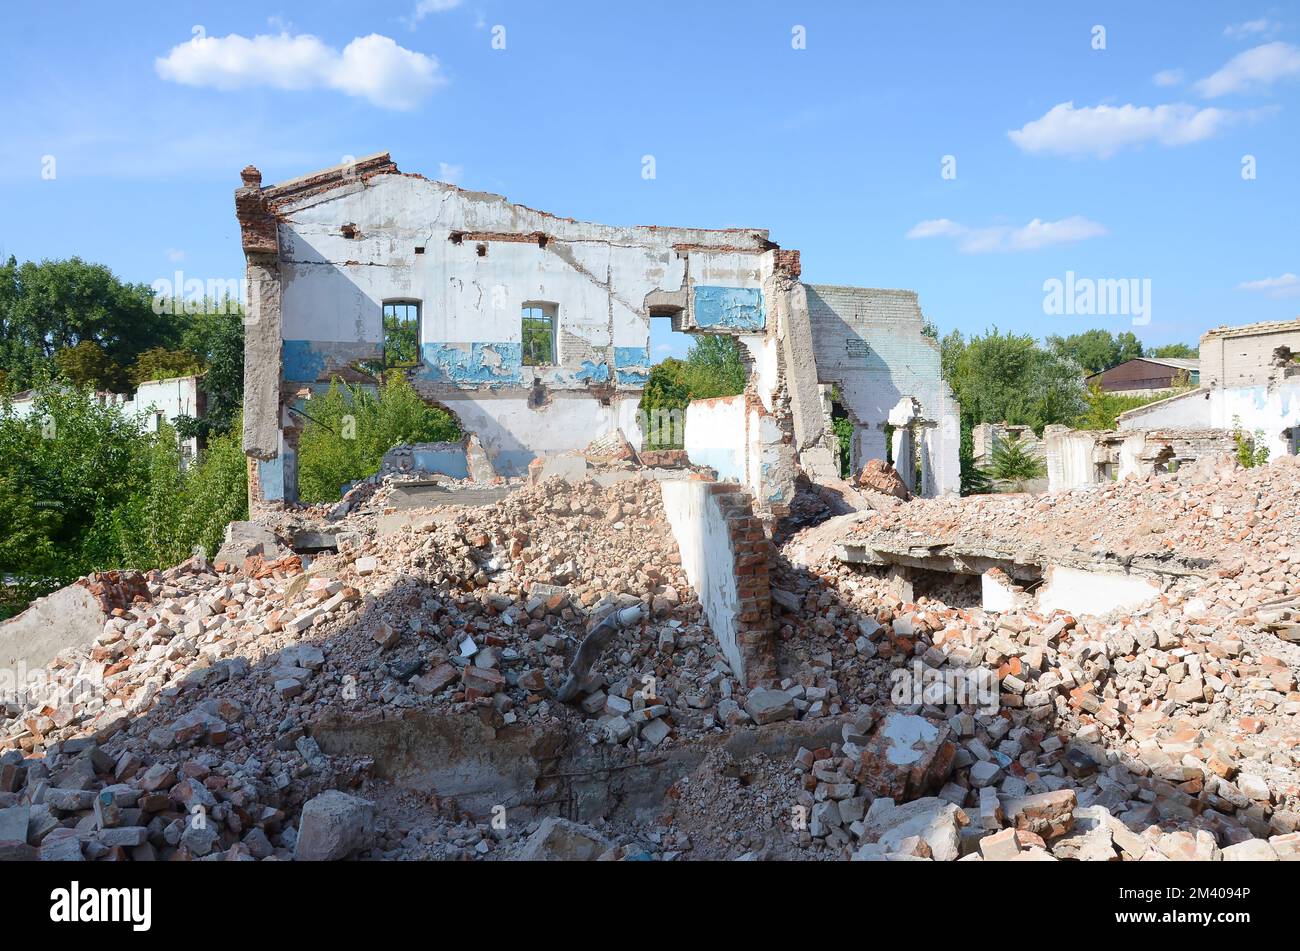 Collapsed industrial multistorey building in daytime. Disaster scene full of debris, broken bricks and damaged non residental house. Concept of war action aftermath or building demolition Stock Photo